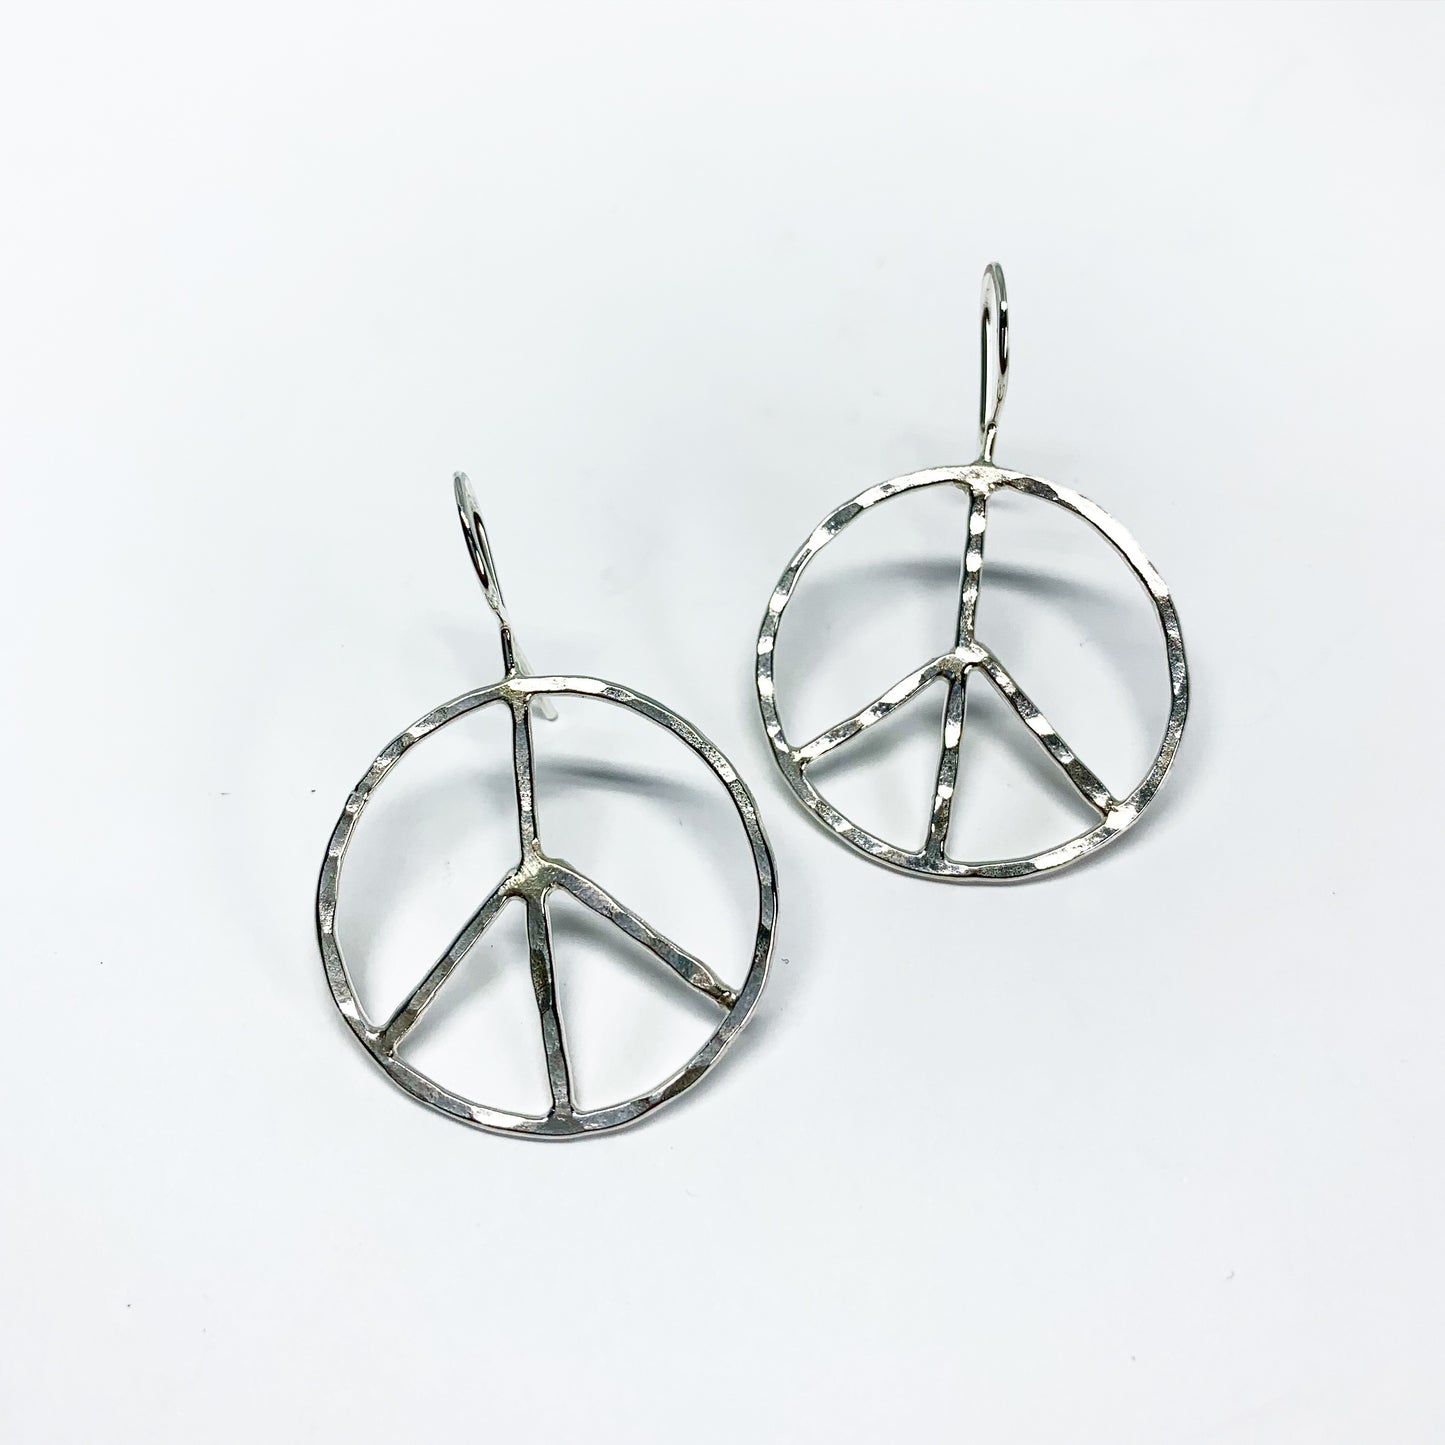 Rustic Peace Sign Earrings - Let There Be Peace Earrings - Small - Jennifer Cervelli Jewelry